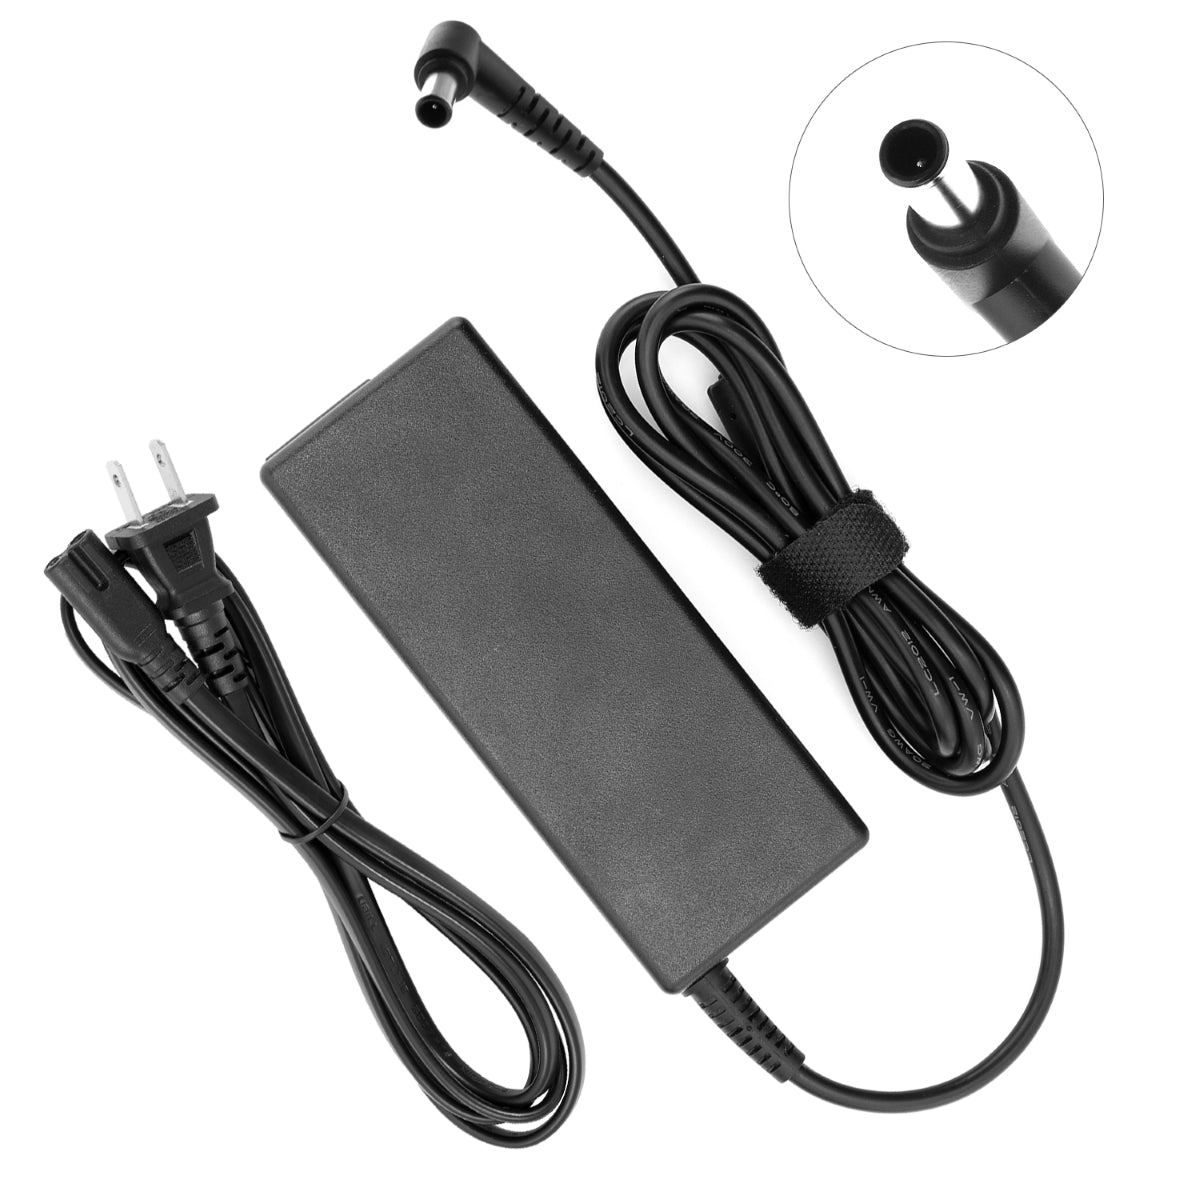 Power Adapter for LG 24LM530S-PU Monitor TV